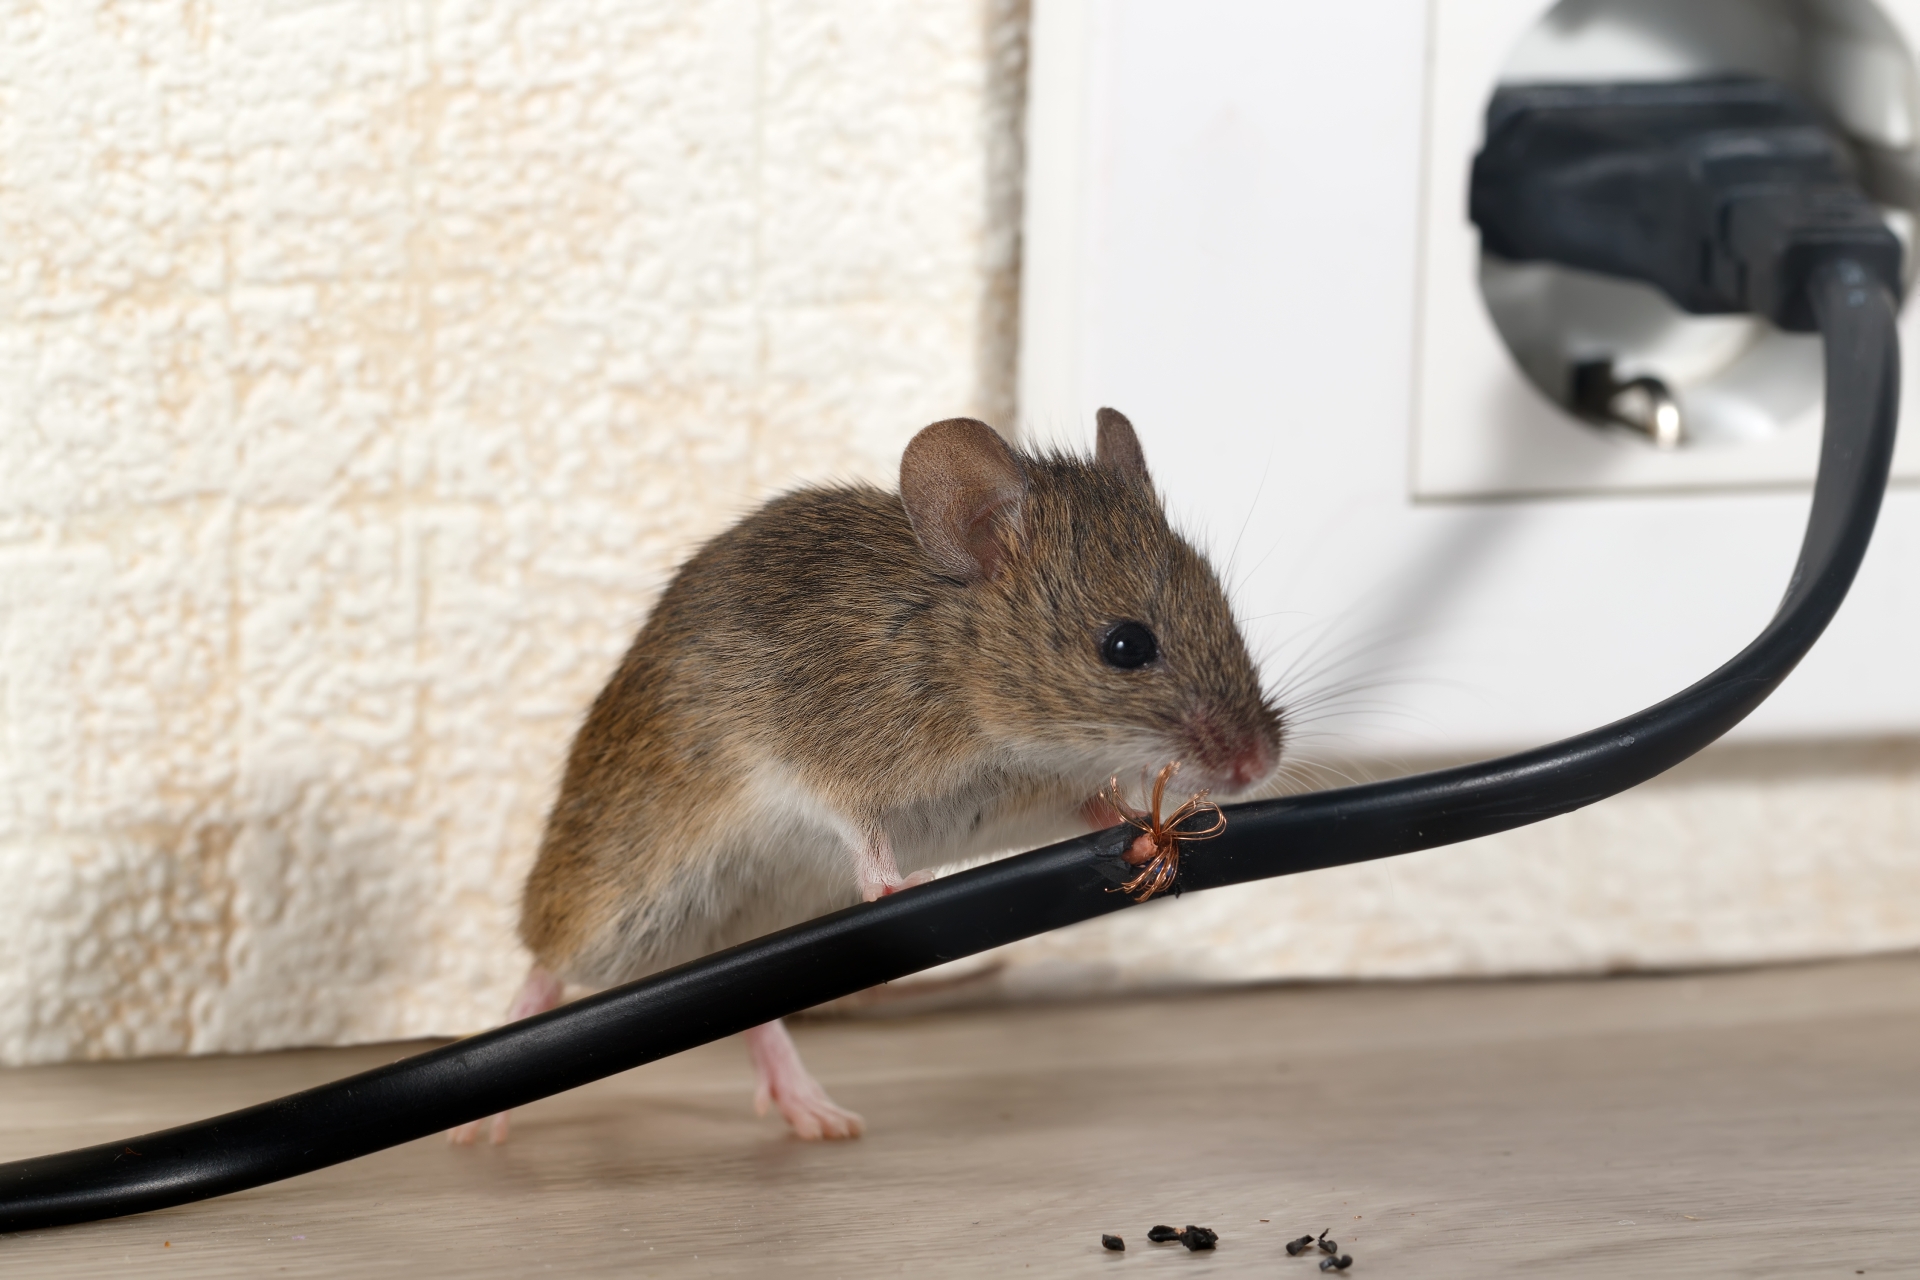 Mice Infestation, Pest Control in Esher, Claygate, KT10. Call Now 020 8166 9746